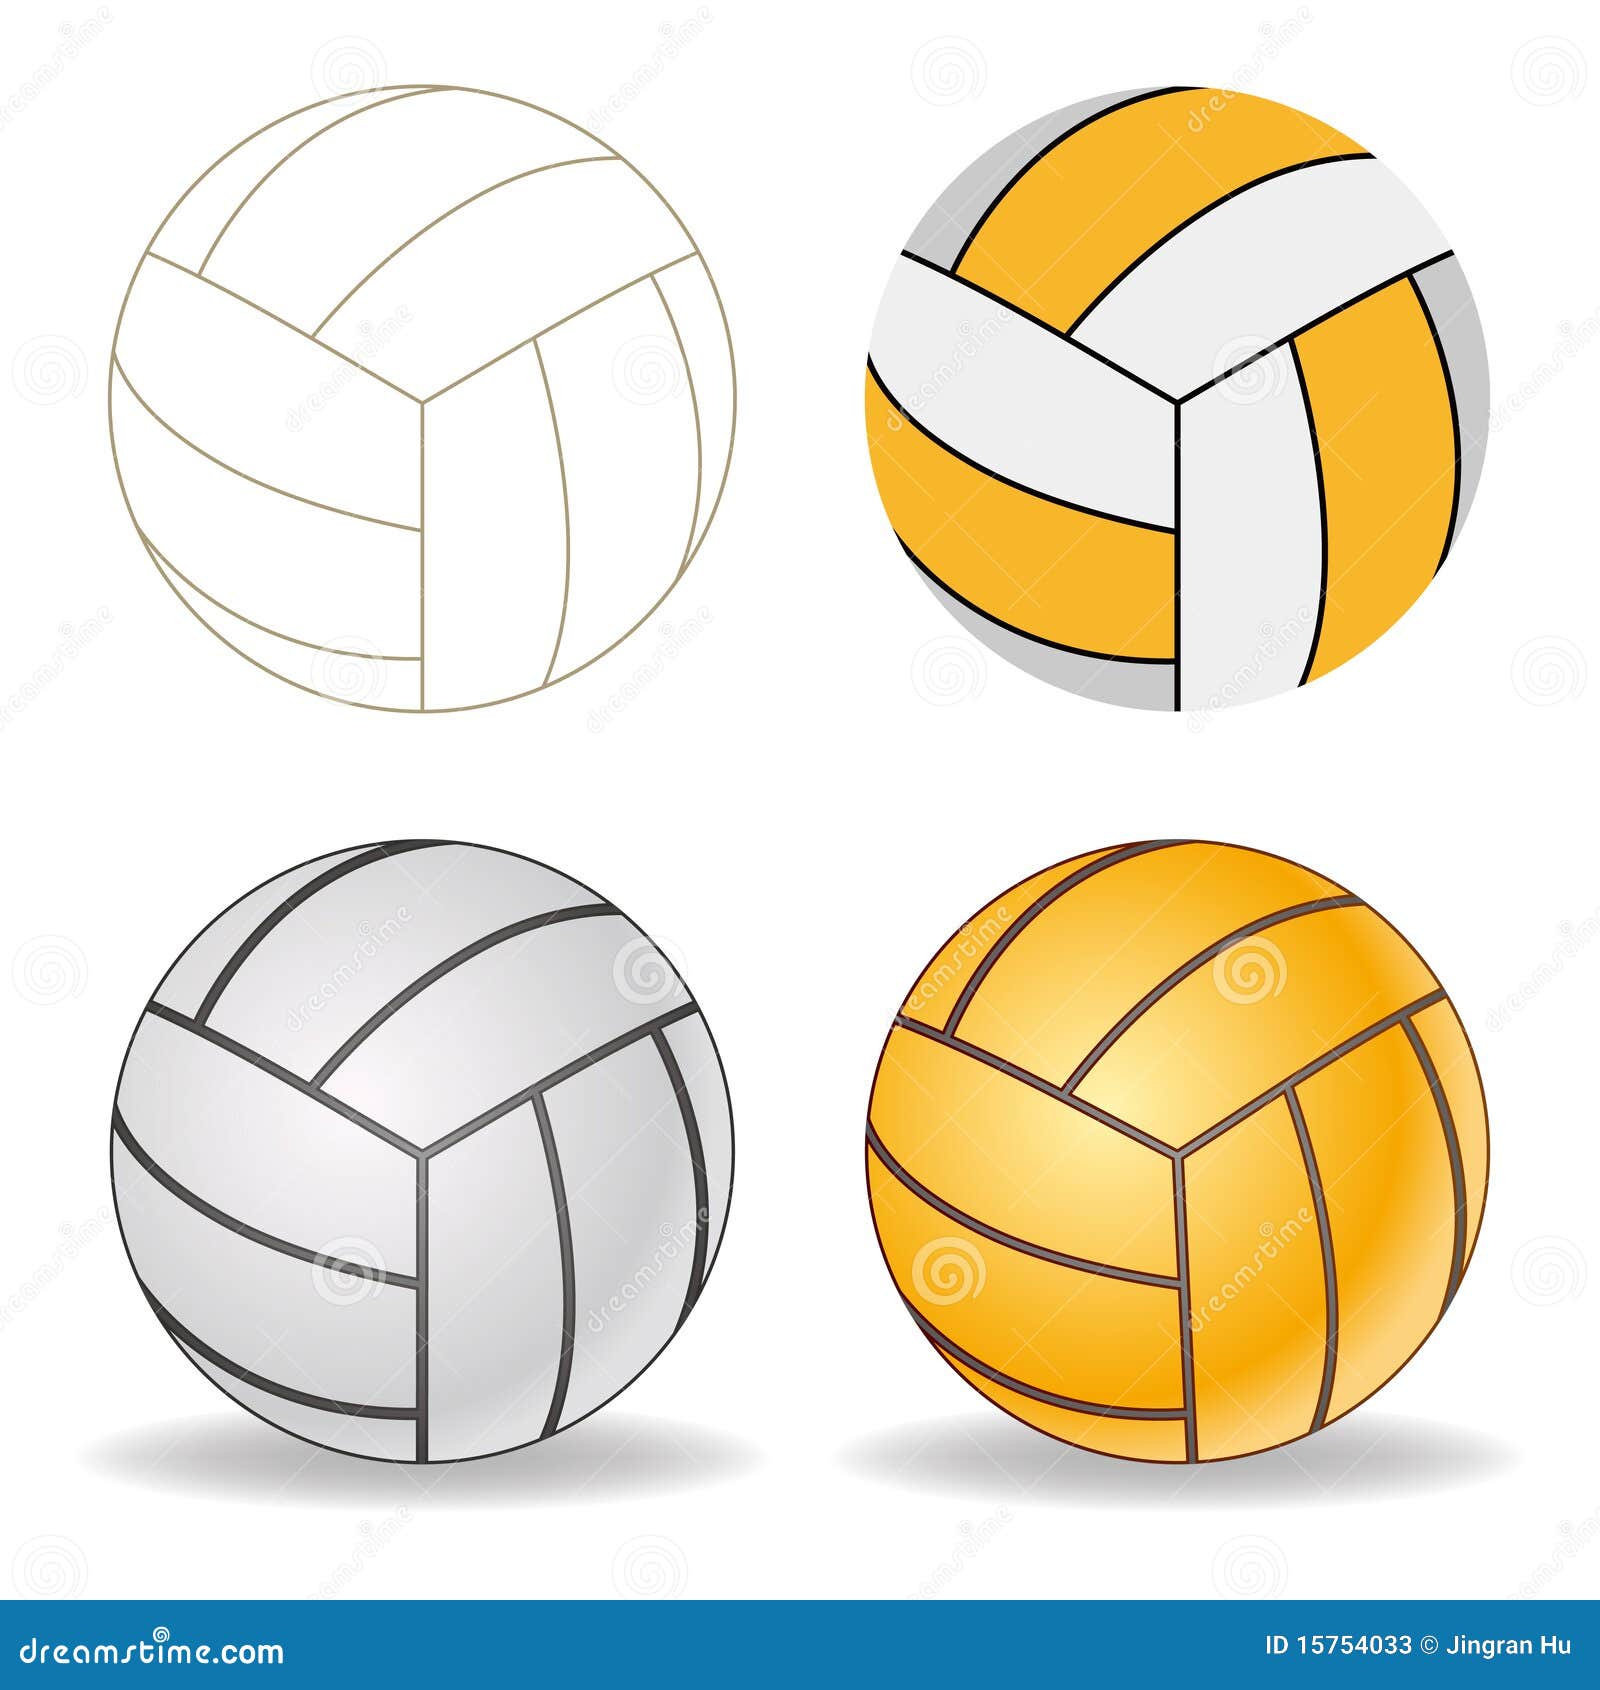 volleyball clipart no background - photo #28